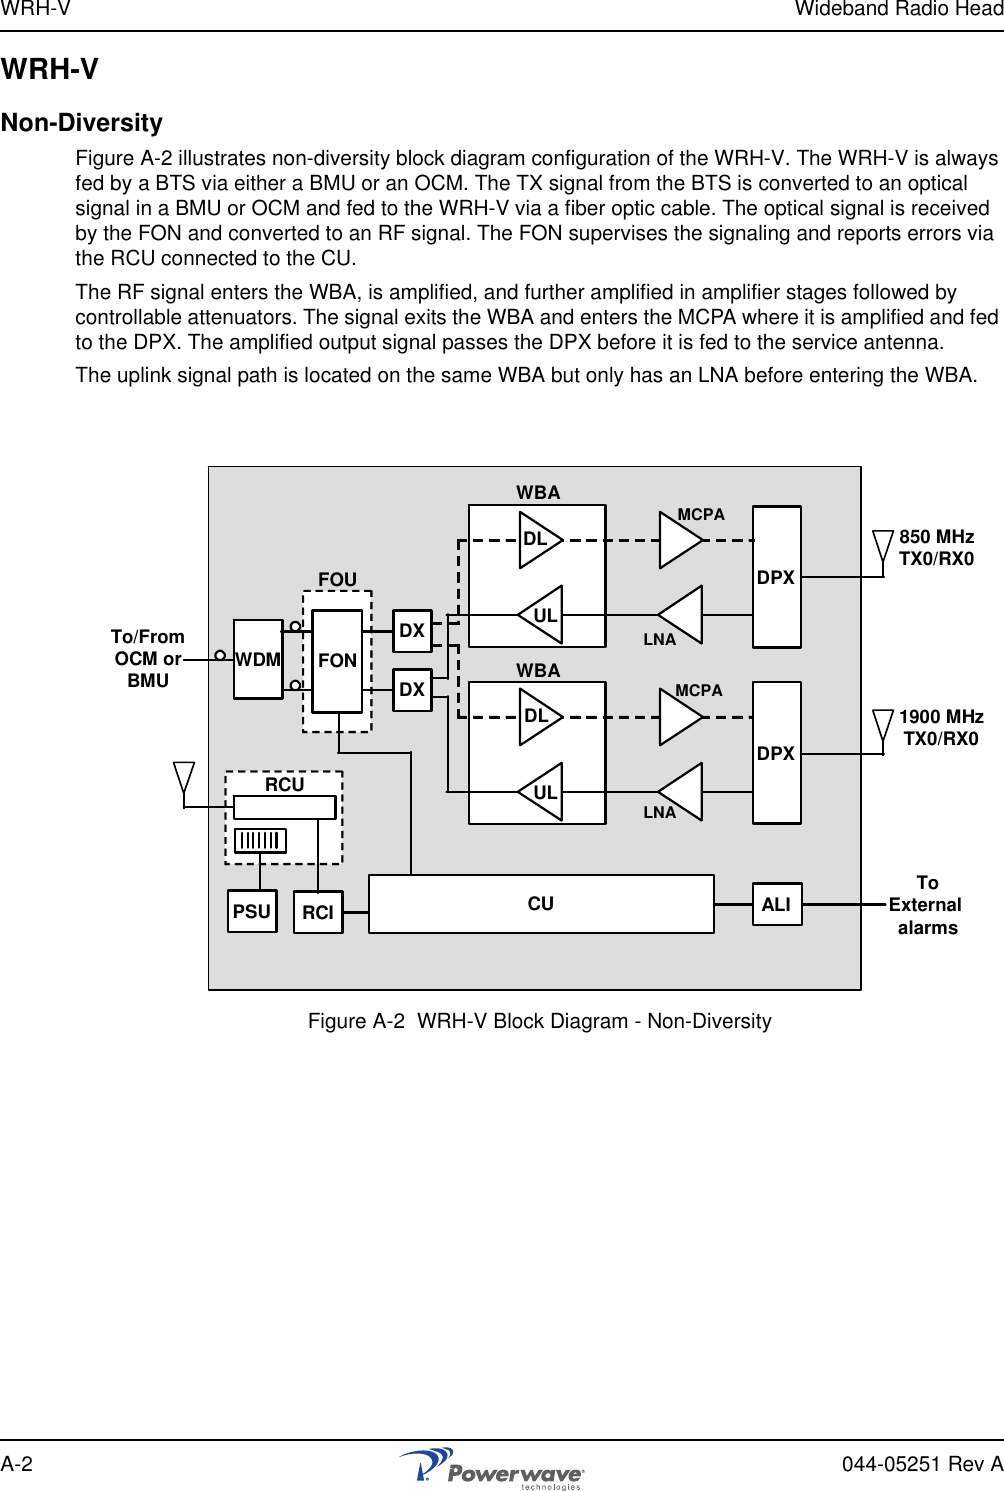 WRH-V Wideband Radio HeadA-2 044-05251 Rev AWRH-VNon-DiversityFigure A-2 illustrates non-diversity block diagram configuration of the WRH-V. The WRH-V is always fed by a BTS via either a BMU or an OCM. The TX signal from the BTS is converted to an optical signal in a BMU or OCM and fed to the WRH-V via a fiber optic cable. The optical signal is received by the FON and converted to an RF signal. The FON supervises the signaling and reports errors via the RCU connected to the CU.The RF signal enters the WBA, is amplified, and further amplified in amplifier stages followed by controllable attenuators. The signal exits the WBA and enters the MCPA where it is amplified and fed to the DPX. The amplified output signal passes the DPX before it is fed to the service antenna.The uplink signal path is located on the same WBA but only has an LNA before entering the WBA.Figure A-2  WRH-V Block Diagram - Non-DiversityWDMFOUDXDXDPXDPXWBAWBADLDLULUL LNALNAMCPAMCPATo/FromOCM orBMURCURCIPSU CUFONALI ToExternal alarms850 MHzTX0/RX01900 MHzTX0/RX0